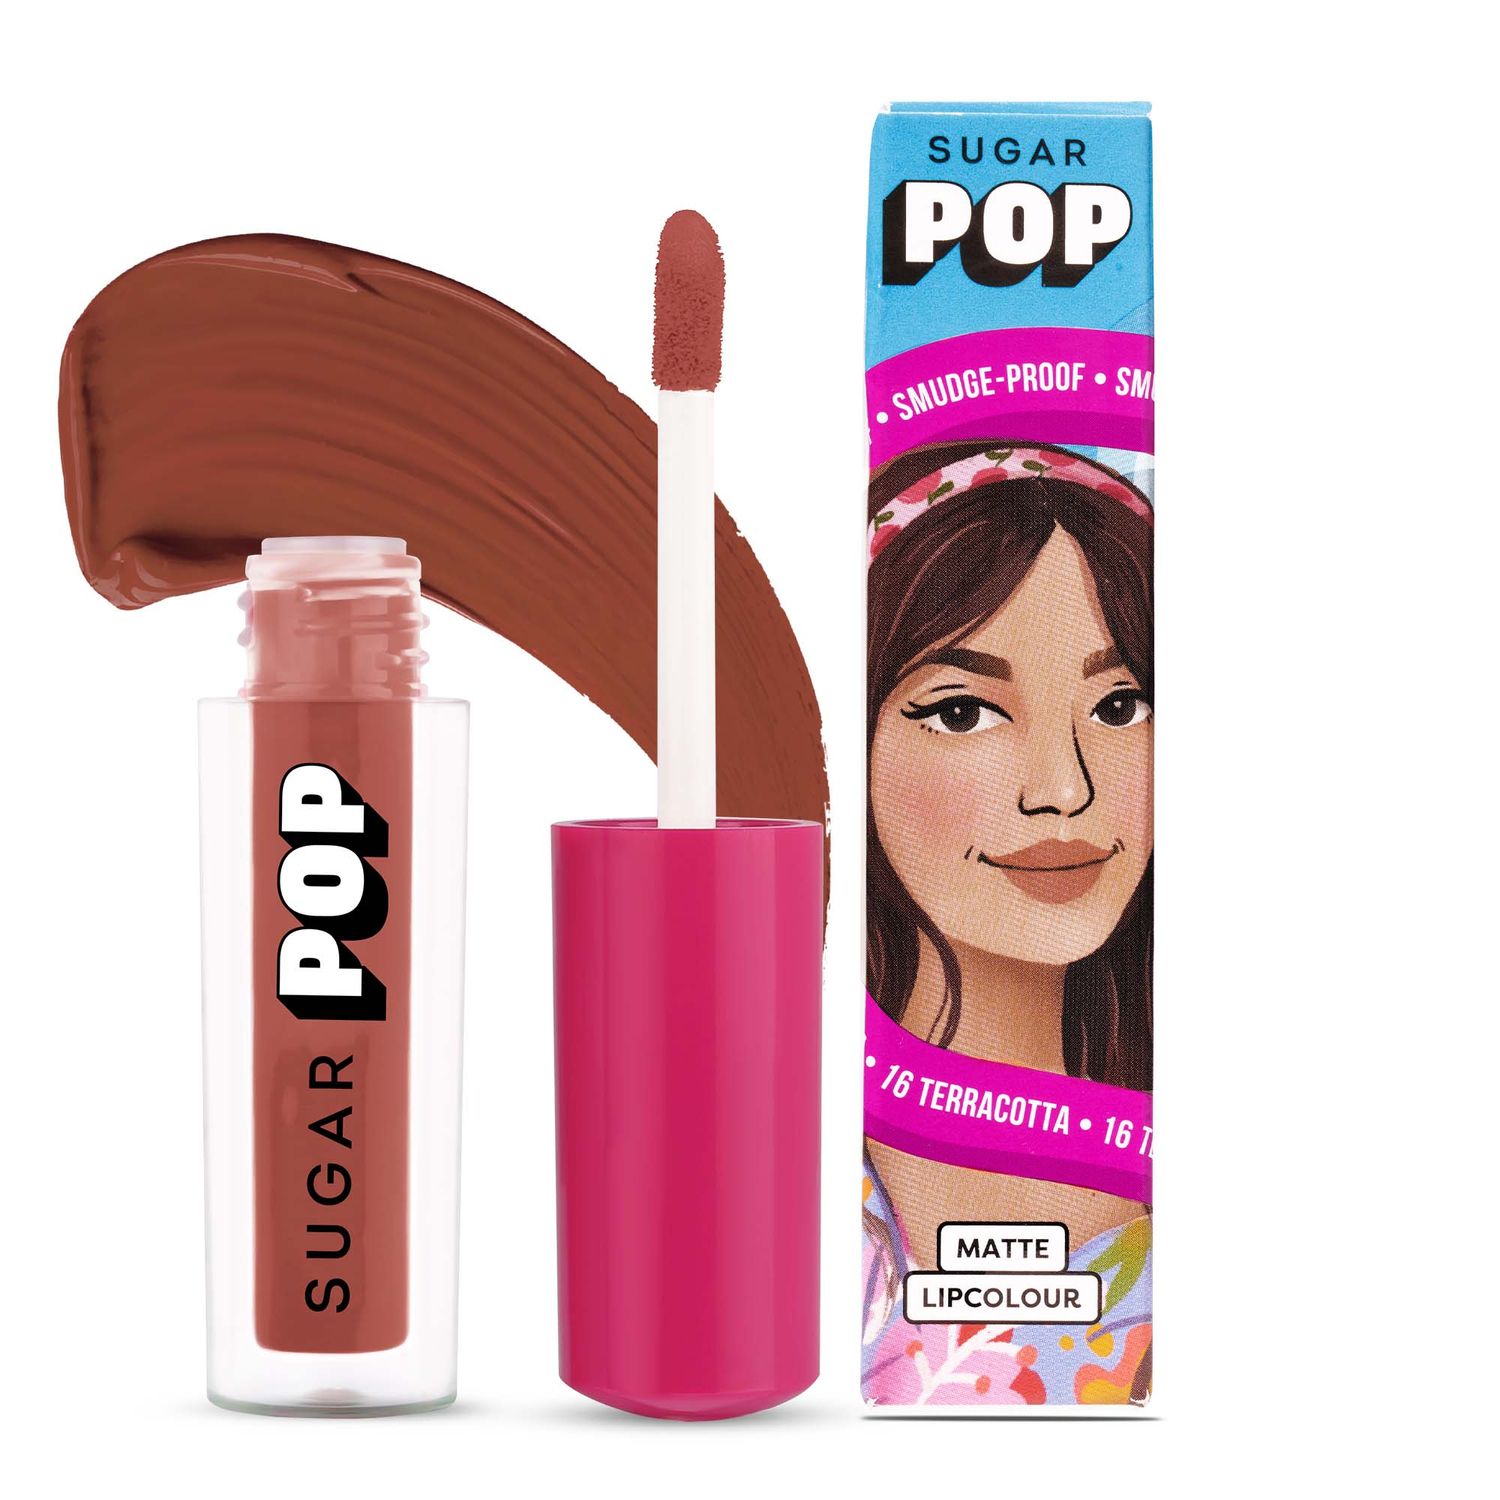 Buy SUGAR POP Matte Lipcolour - 16 Terracotta (Tangerine Brown) – 1.6 ml - Lasts Up to 8 hours l Mauve Lipstick for Women l Non-Drying, Smudge Proof, Long Lasting - Purplle